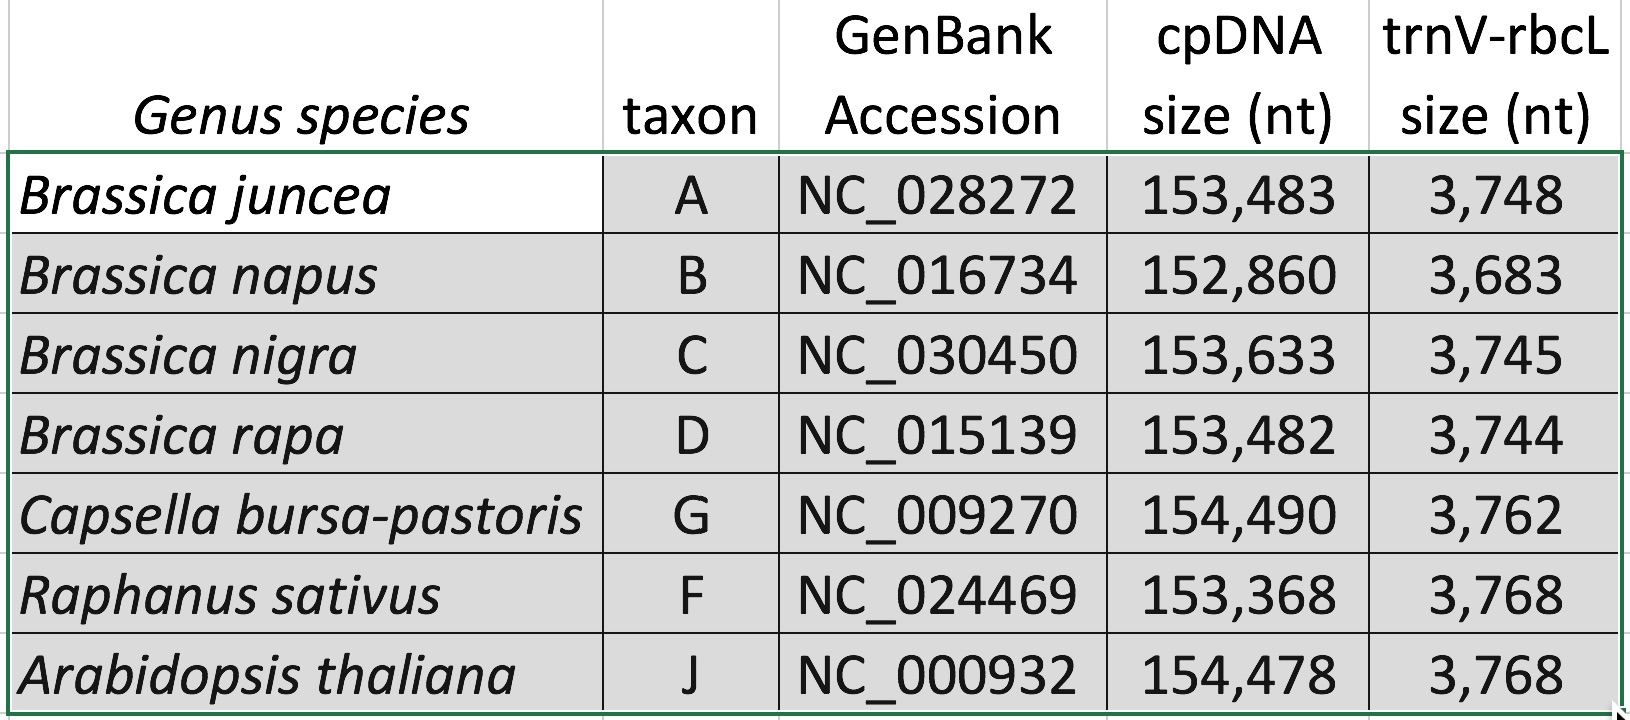 table of GenBank accessions